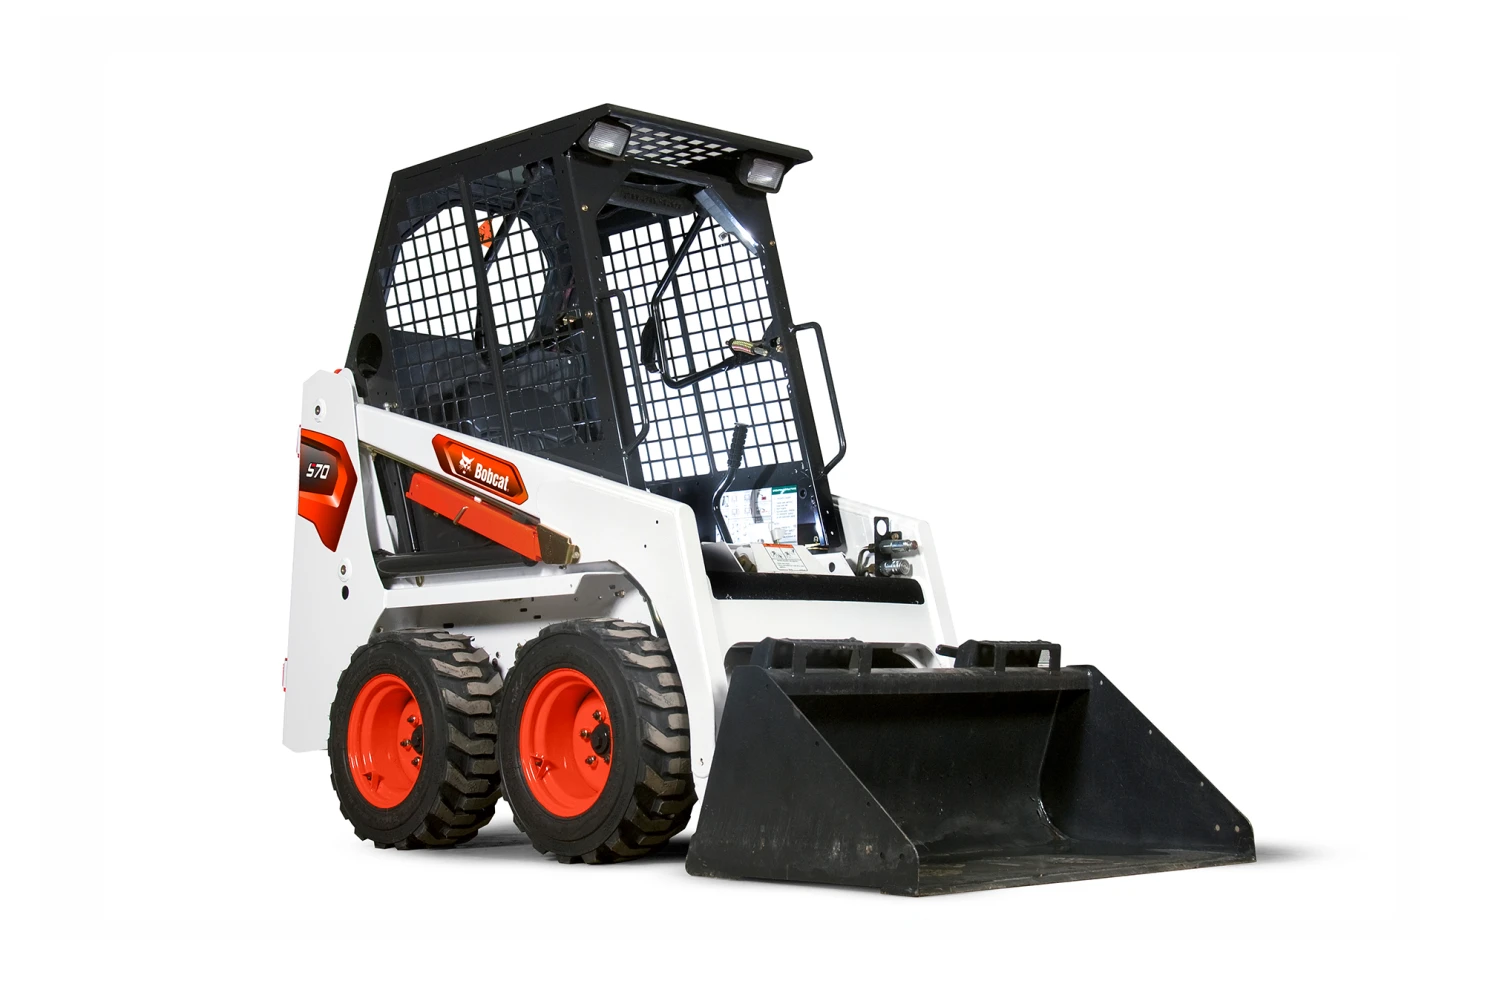 Browse Specs and more for the Bobcat S70 Skid-Steer Loader - White Star Machinery